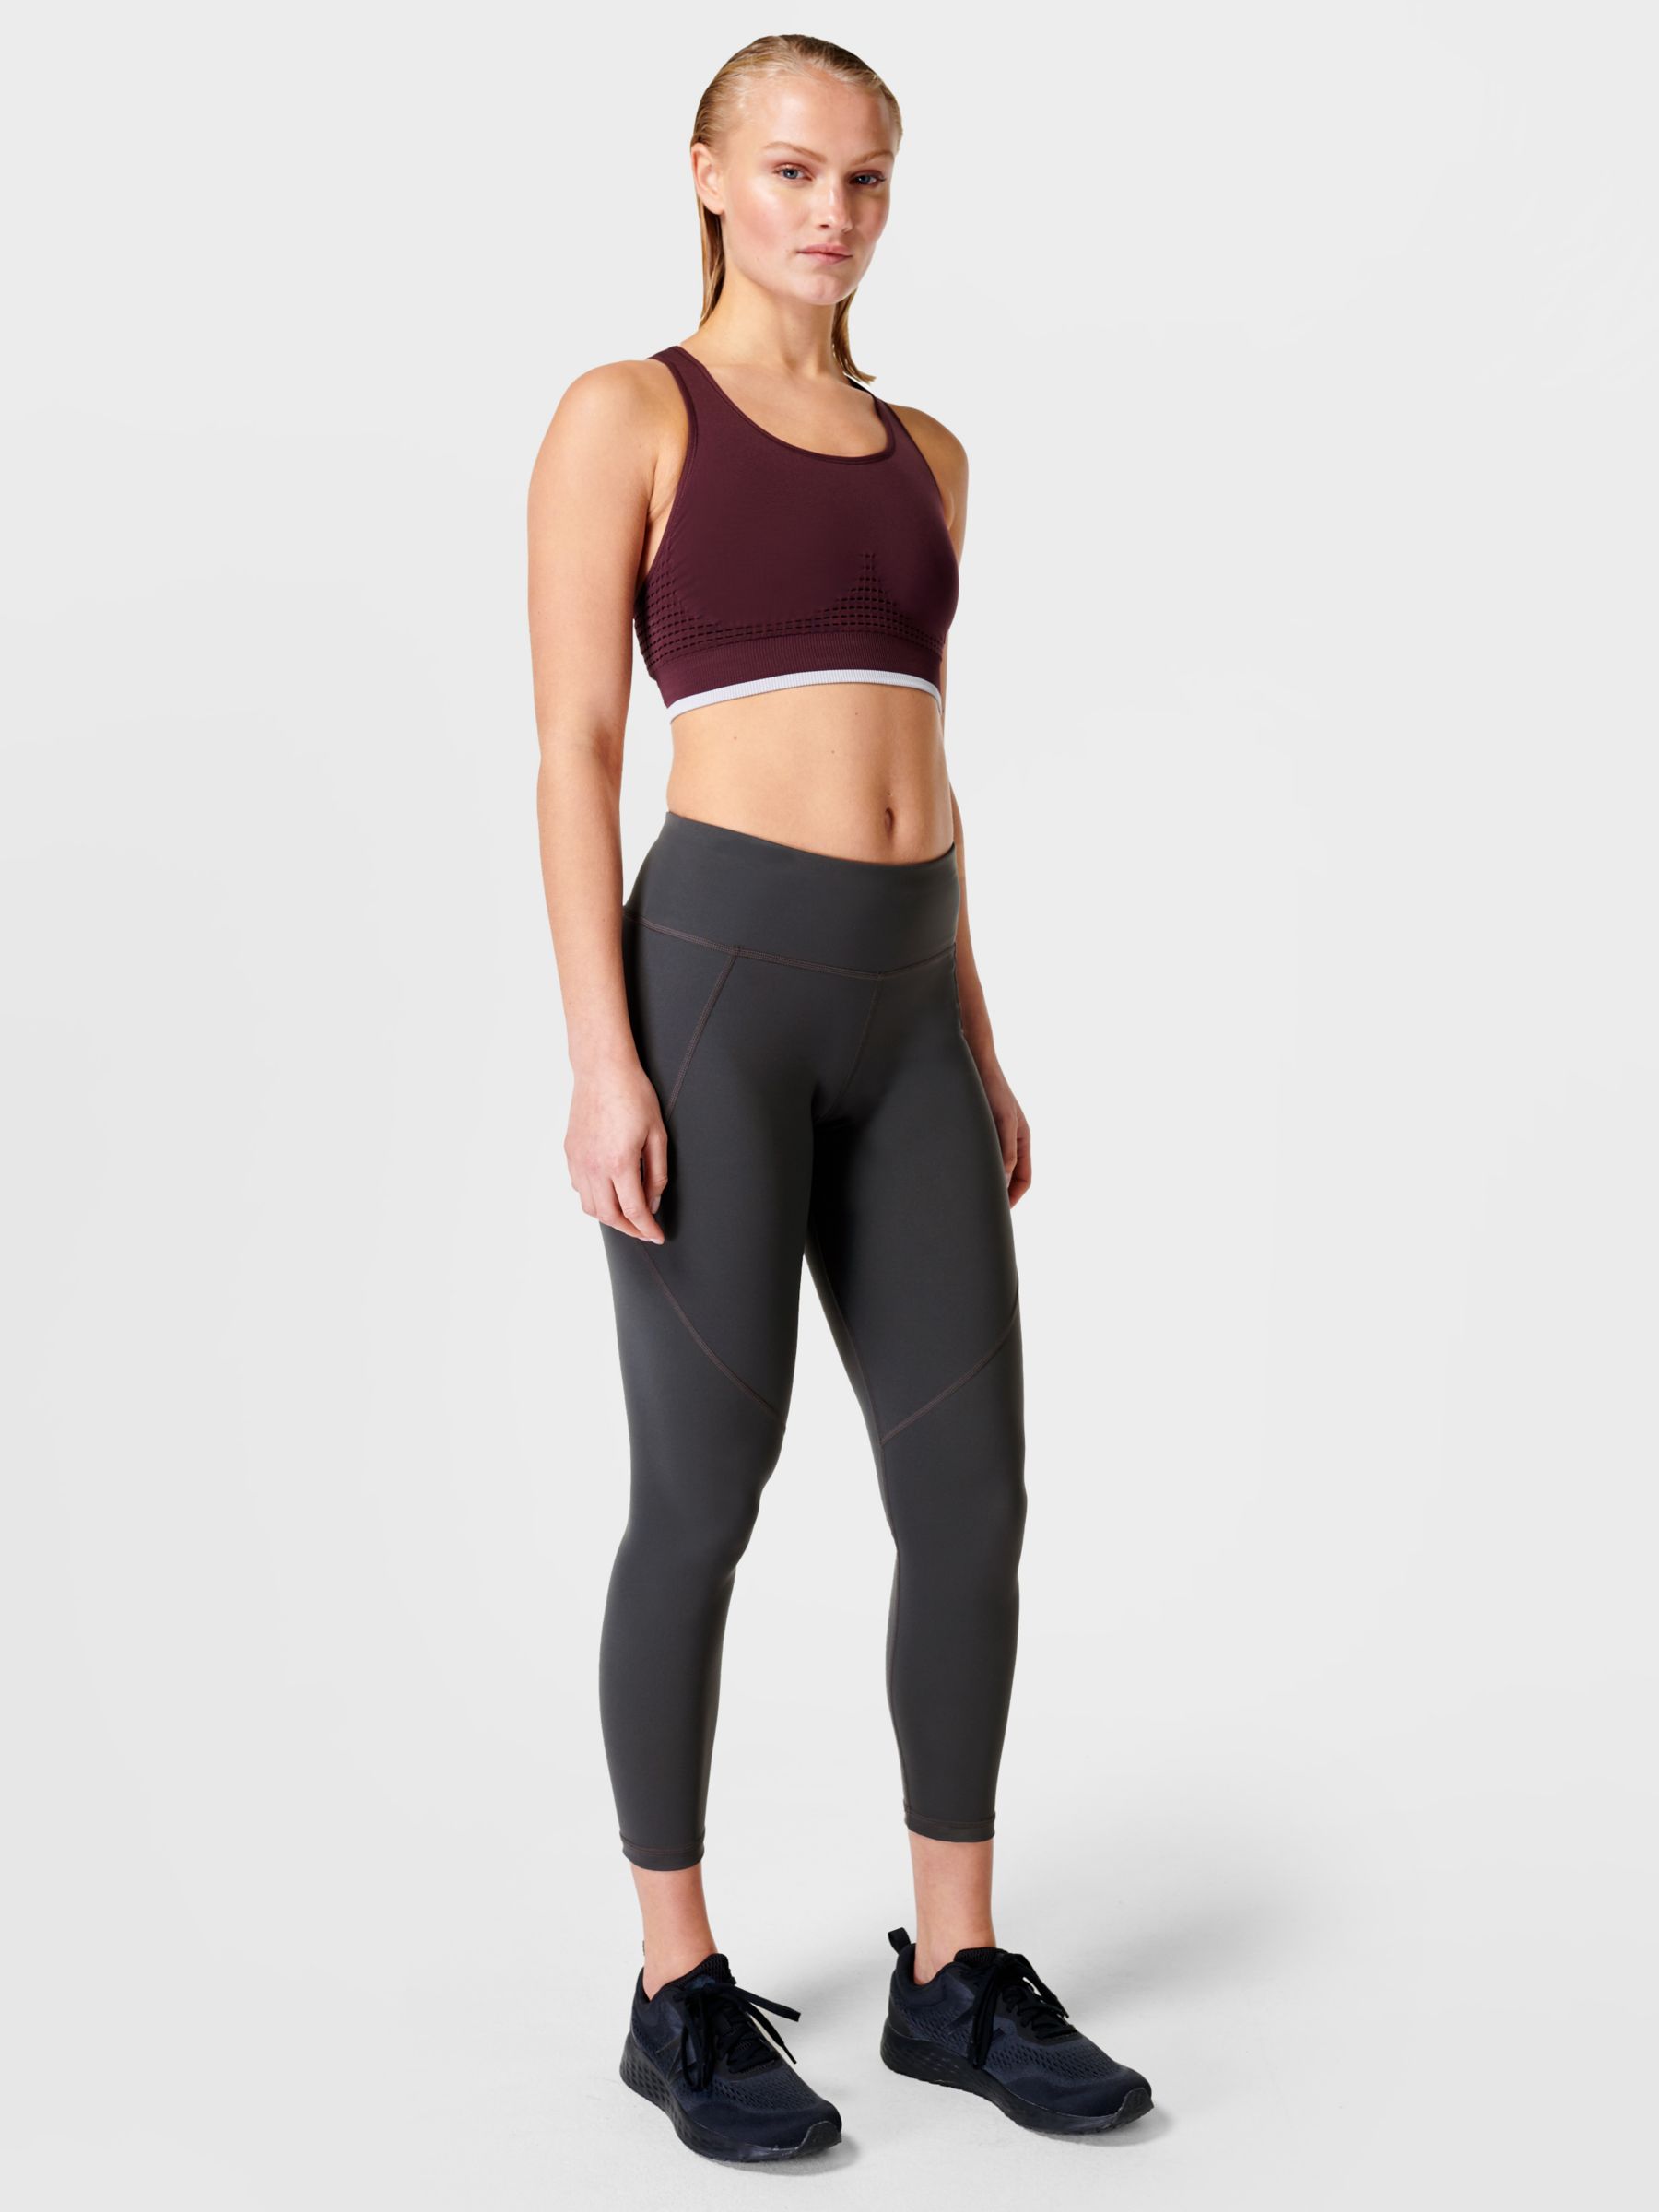 Sweaty Betty Power Mesh Leggings, 7 Seriously Comfortable Leggings You  Need to Try — From 1 Cool Activewear Brand